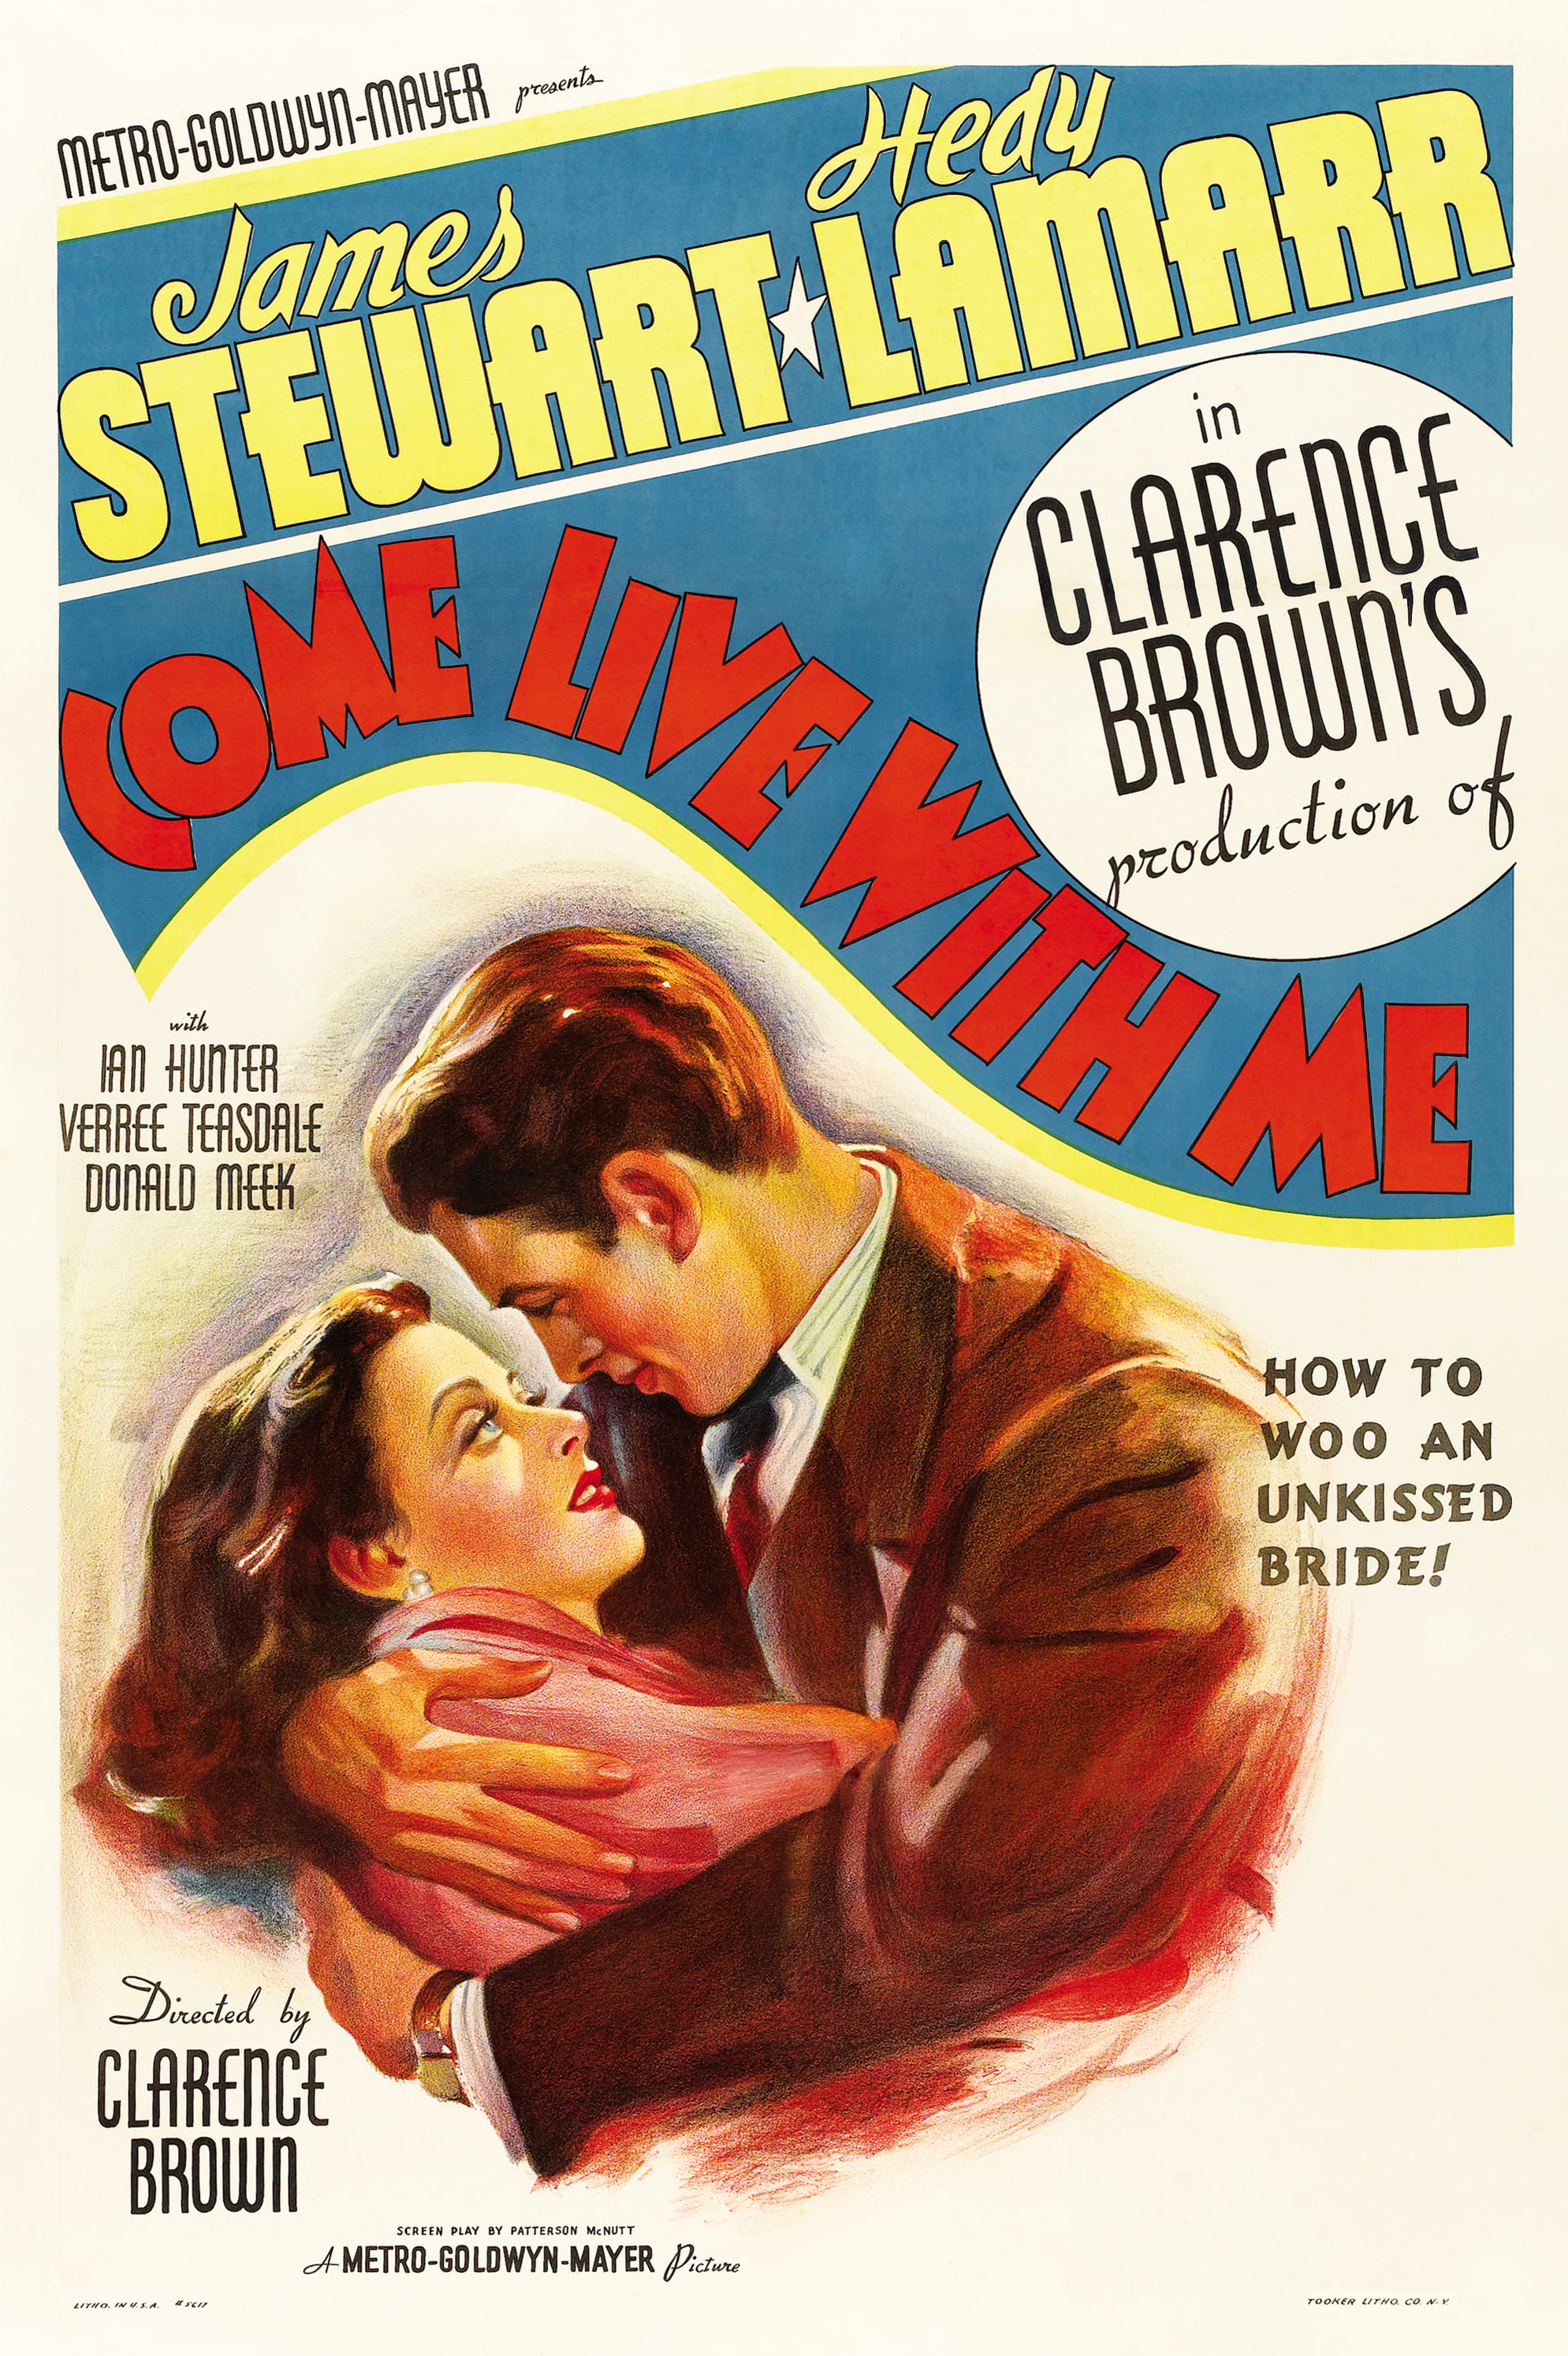 Come Live with Me (1941) starring James Stewart on DVD on DVD